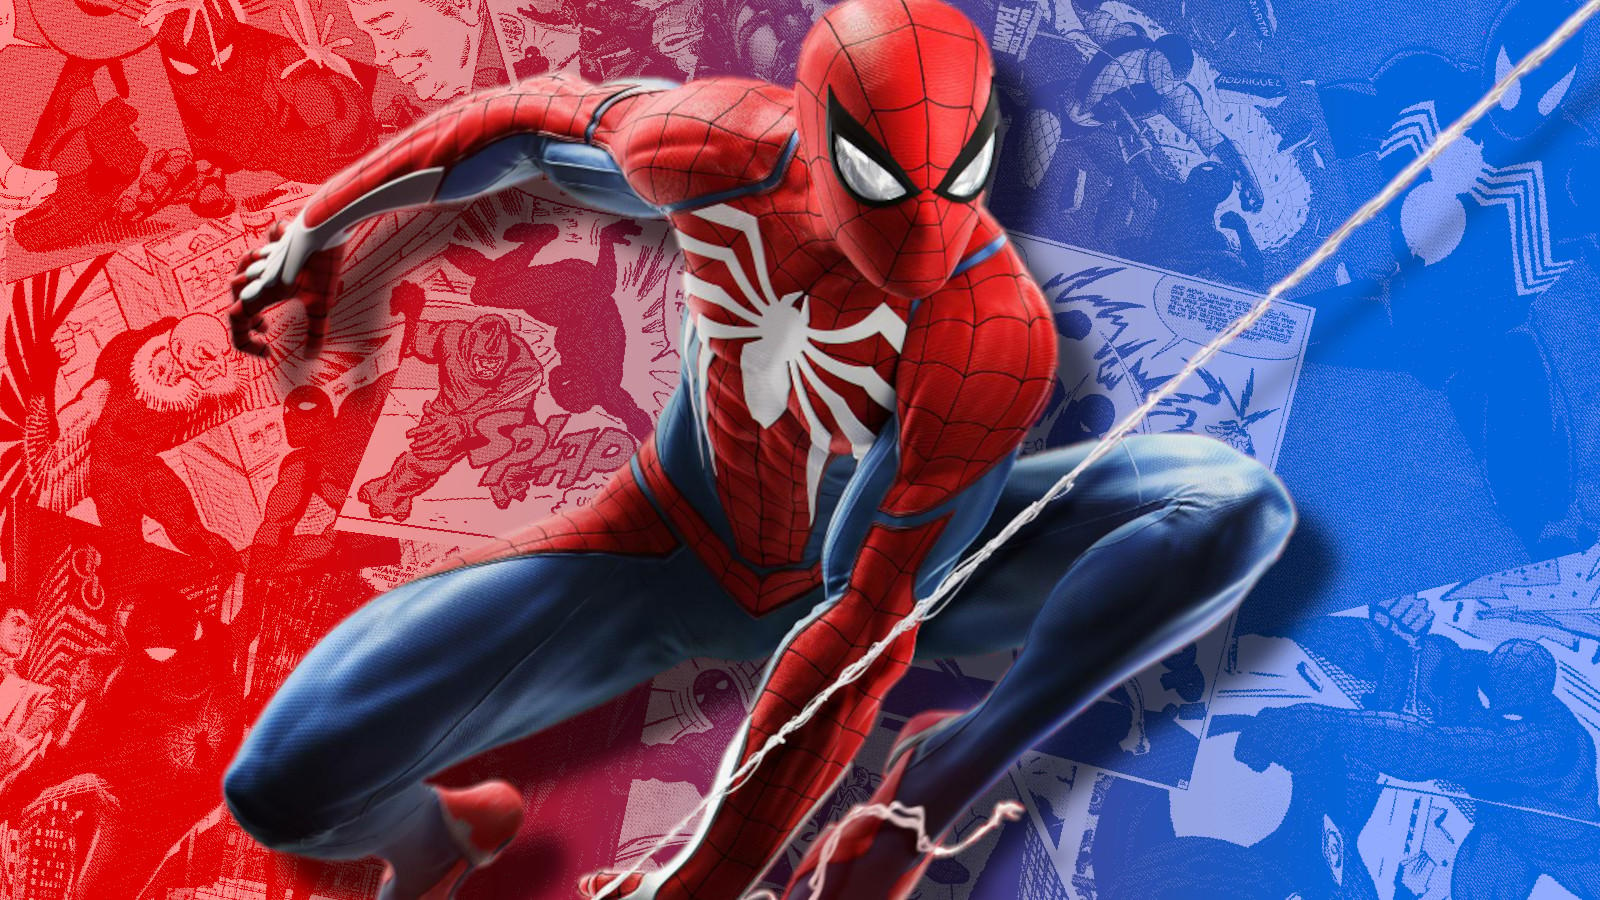 Spider-Man from the Insomniac games leads out ranking of the best Spider-Man games.